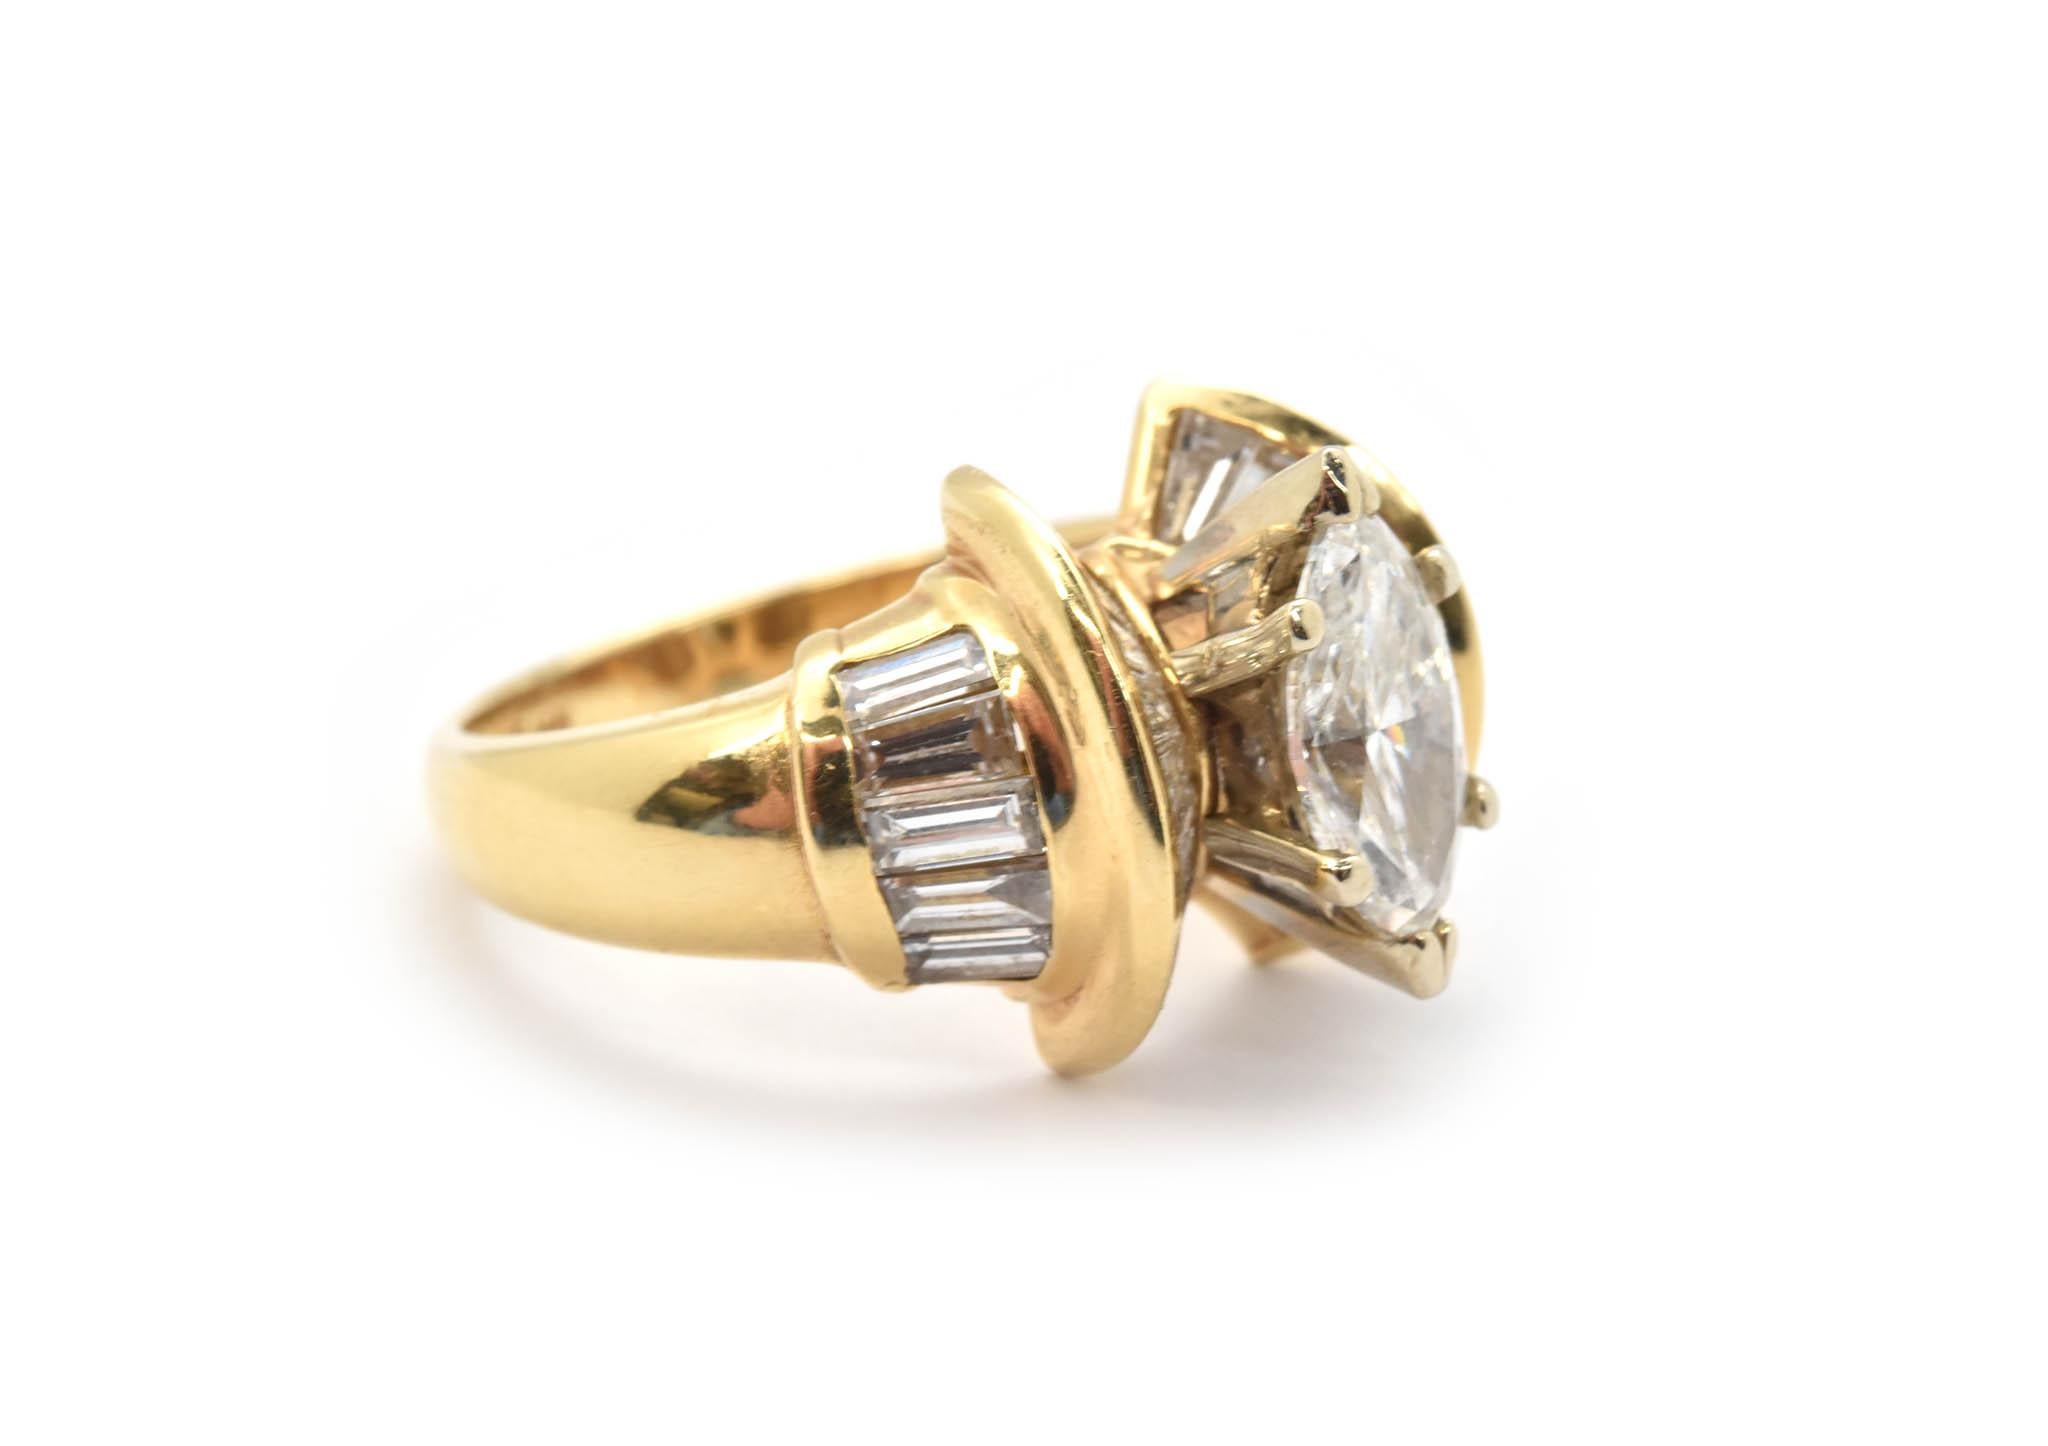 This ring is made in 14k yellow gold, and it holds an EGL-certified marquise-cut diamond. The center stone is graded F in color and SI2 in clarity. The marquise is decorated with an additional 1.60 carats in baguettes for ultimate sparkle. The ring